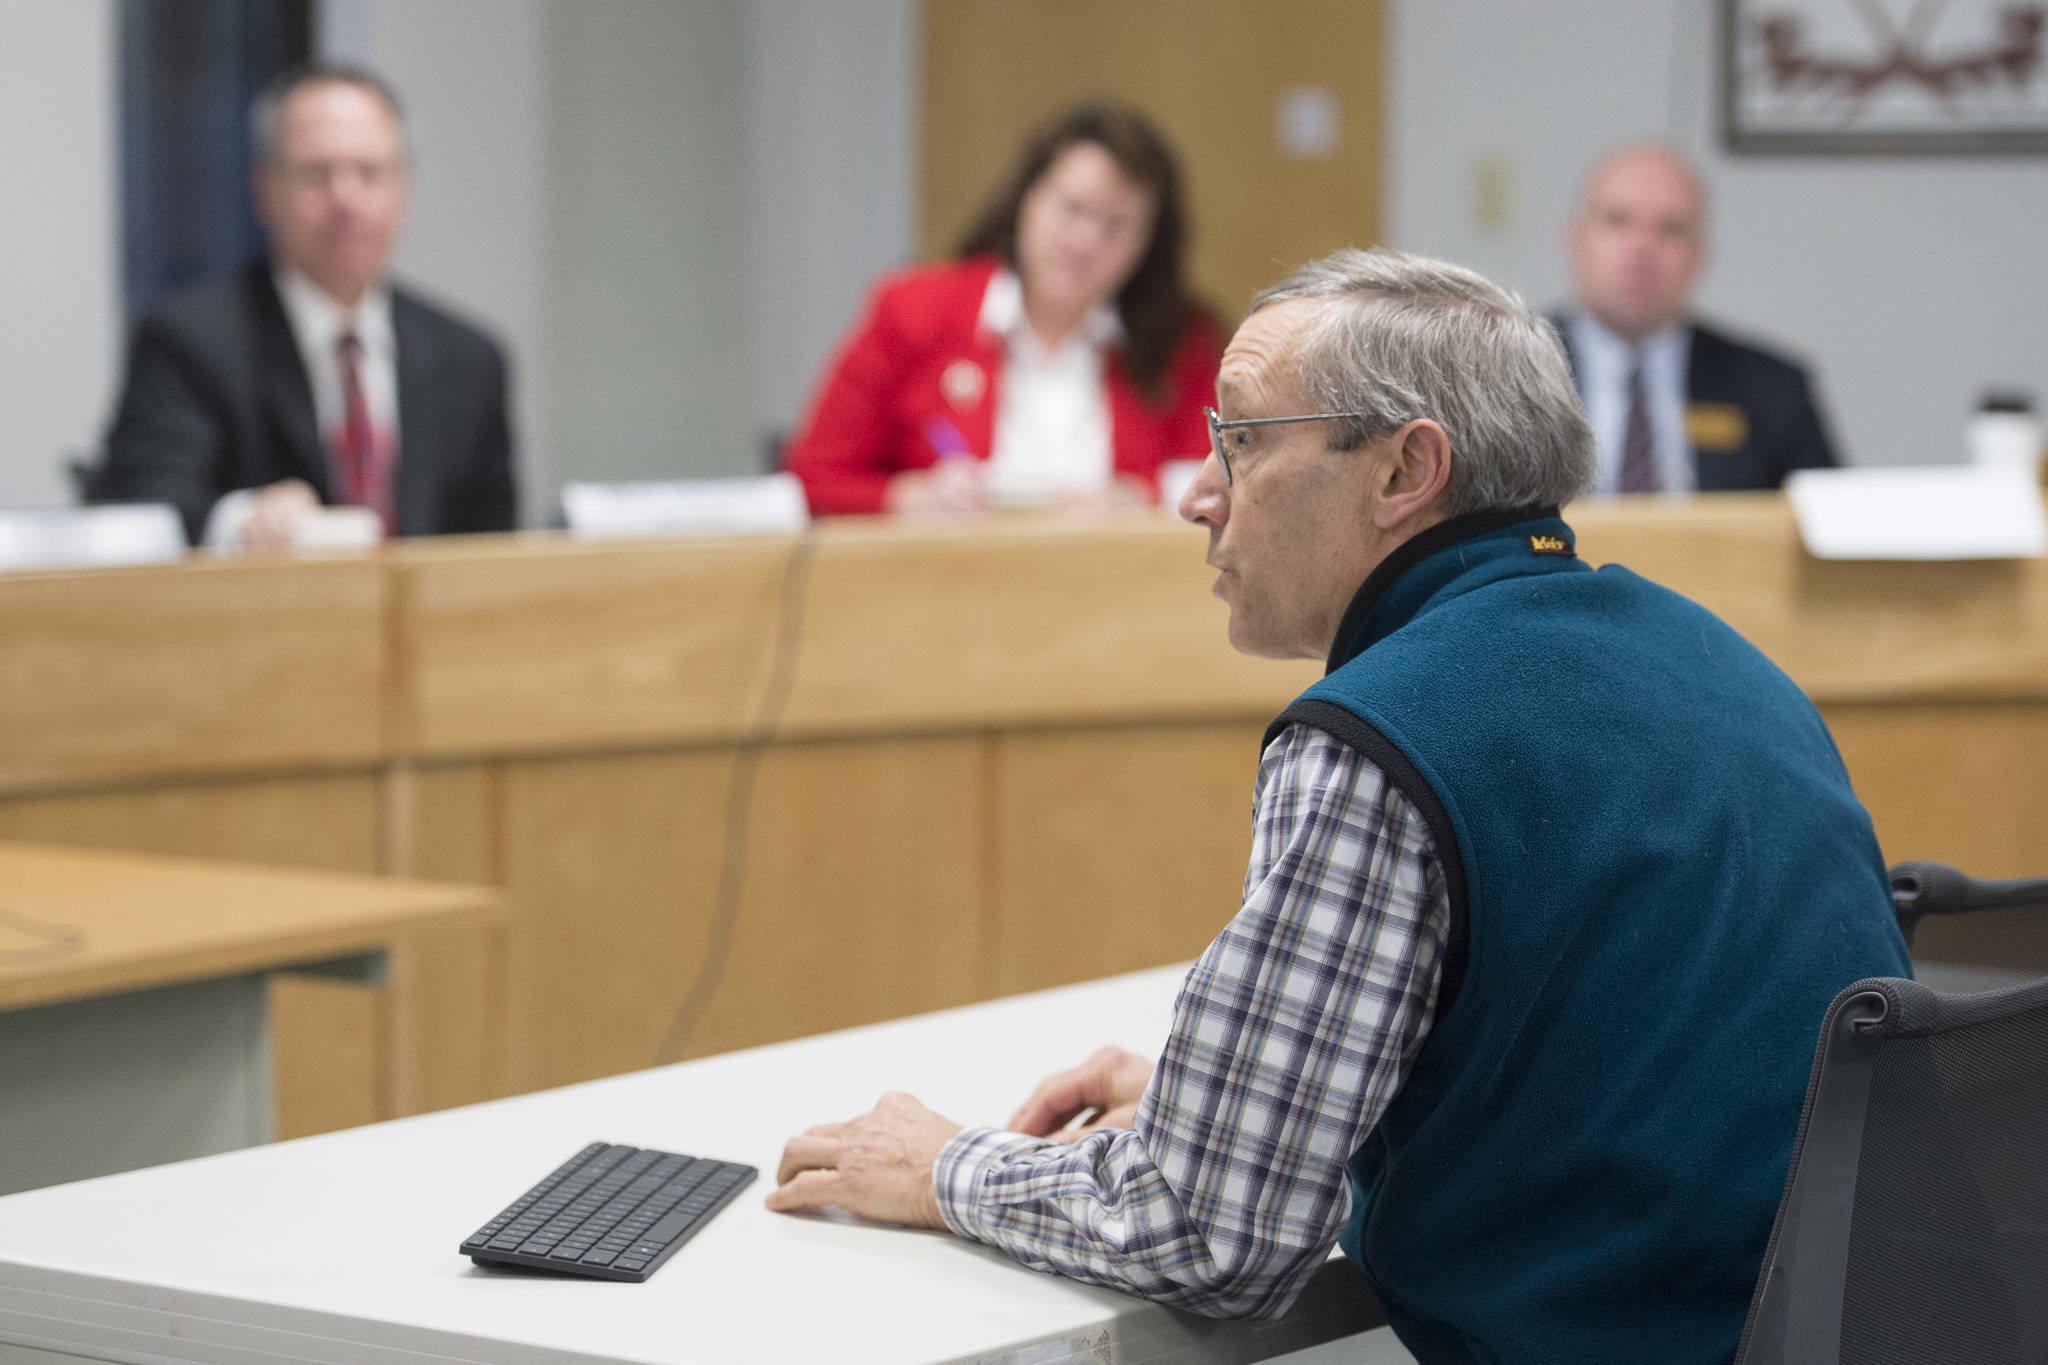 Doug Woodby, co-chair of climate action group @350 Juneau, speaks to the Alaska Permanent Fund Corporation’s Board of Trustees during its quarterly meeting in Juneau on Tuesday, Dec. 11, 2018. The local chapter of the national environmental group has been asking the trustees to divest from fossil fuel investments.